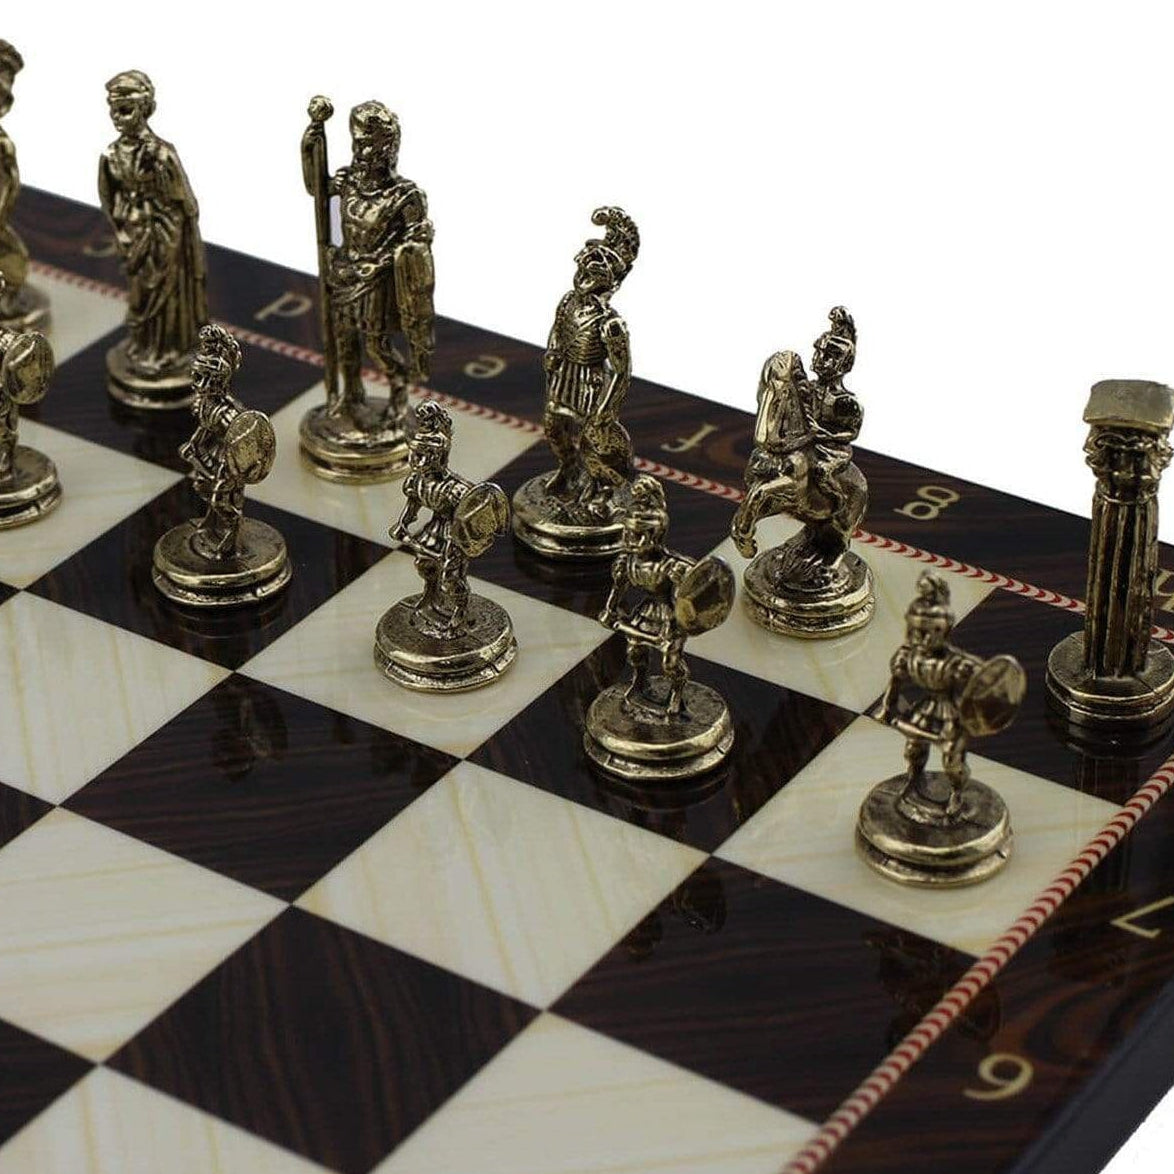 Historical Figures Of Rome Metal Chess Set | Handmade Pieces | Wooden Chess Board | whatagift.com.au.